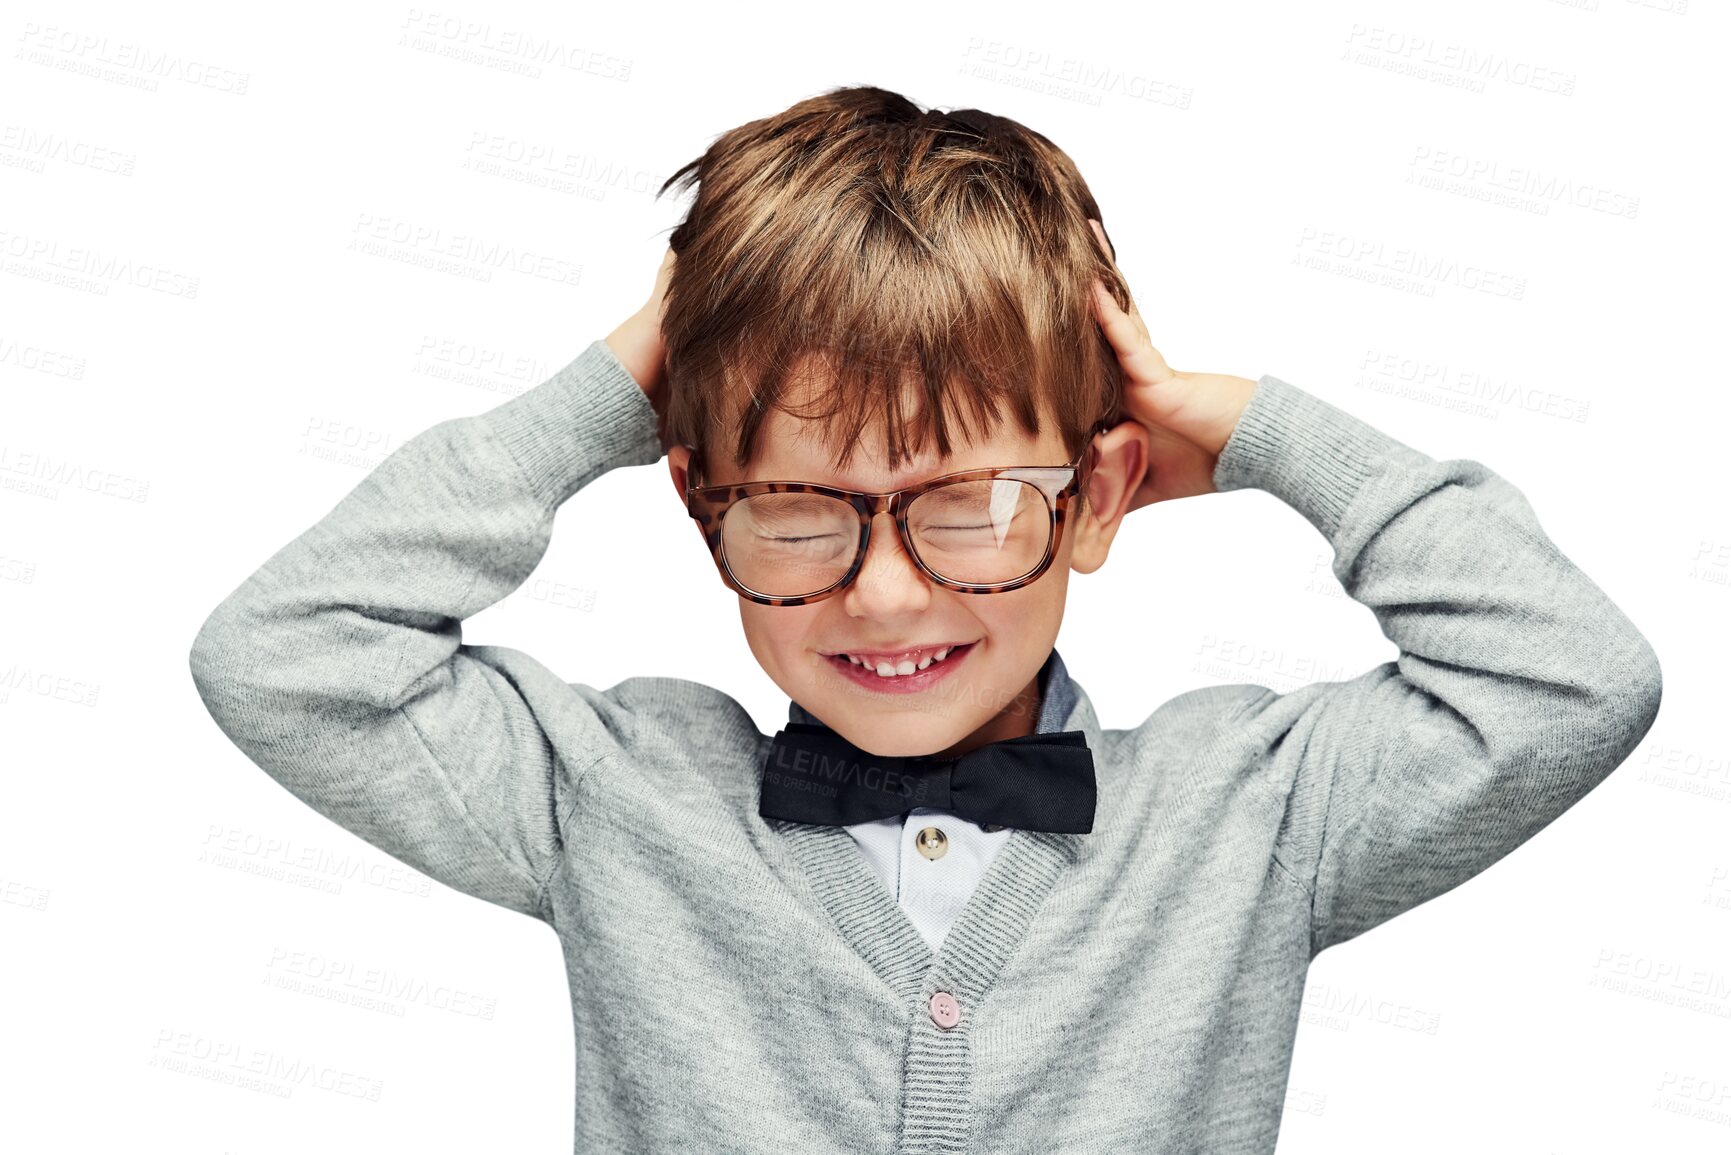 Buy stock photo Child, boy and grimace with glasses for fashion with bow tie, with casual outfit, trendy style and happy. Kid, eyewear and confidence with energy and relax isolated on a png transparent background